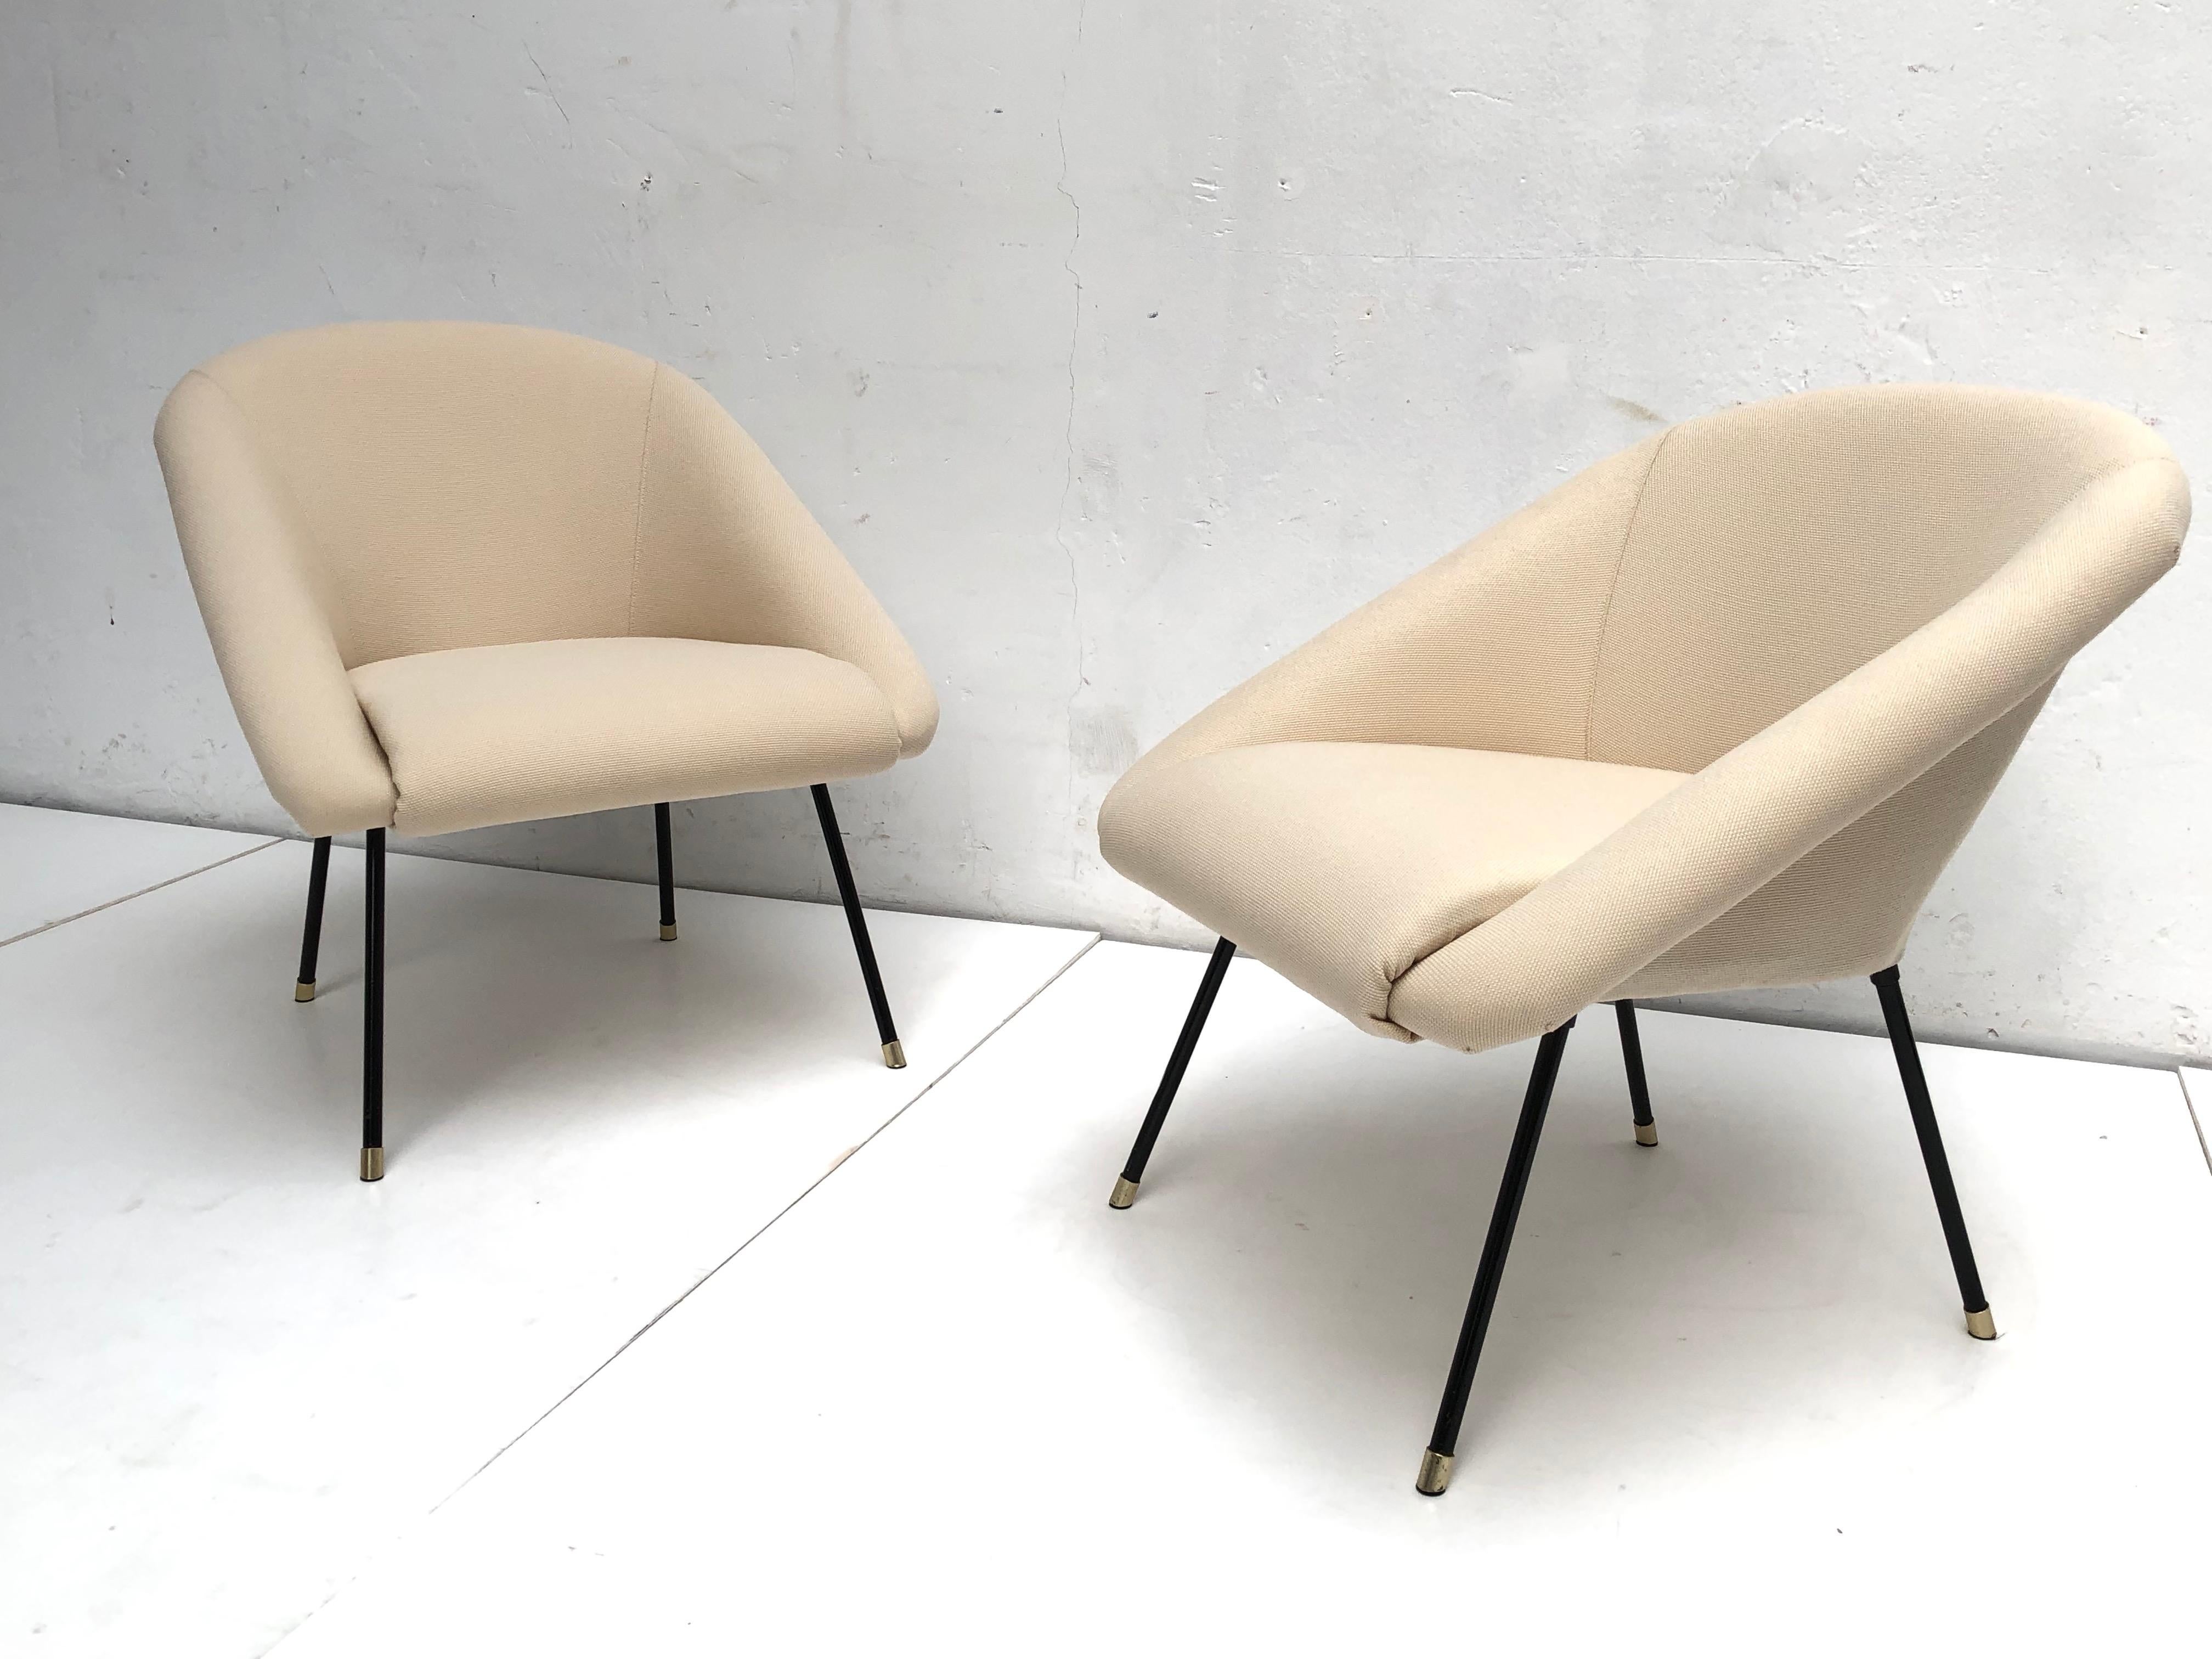 These little Italian 1950s lounge chairs have been re-upholstered with new De Ploeg Fabric in our upholstery atelier

New Latex foam has been applied on the original rubber Pirelli strapping 

The final upholstery turned our to be a labour